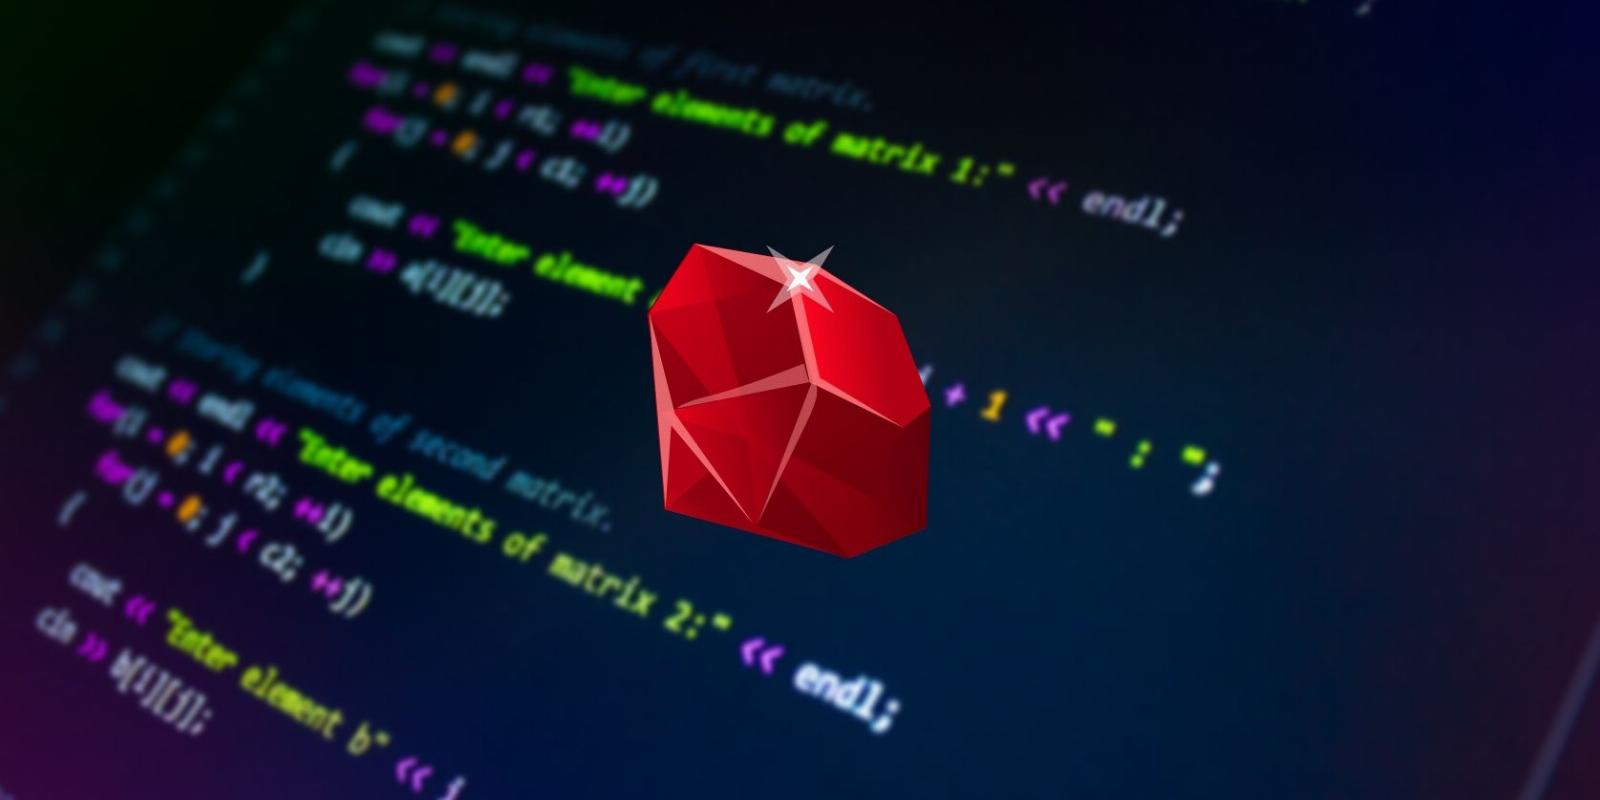 How to Install Ruby on Linux